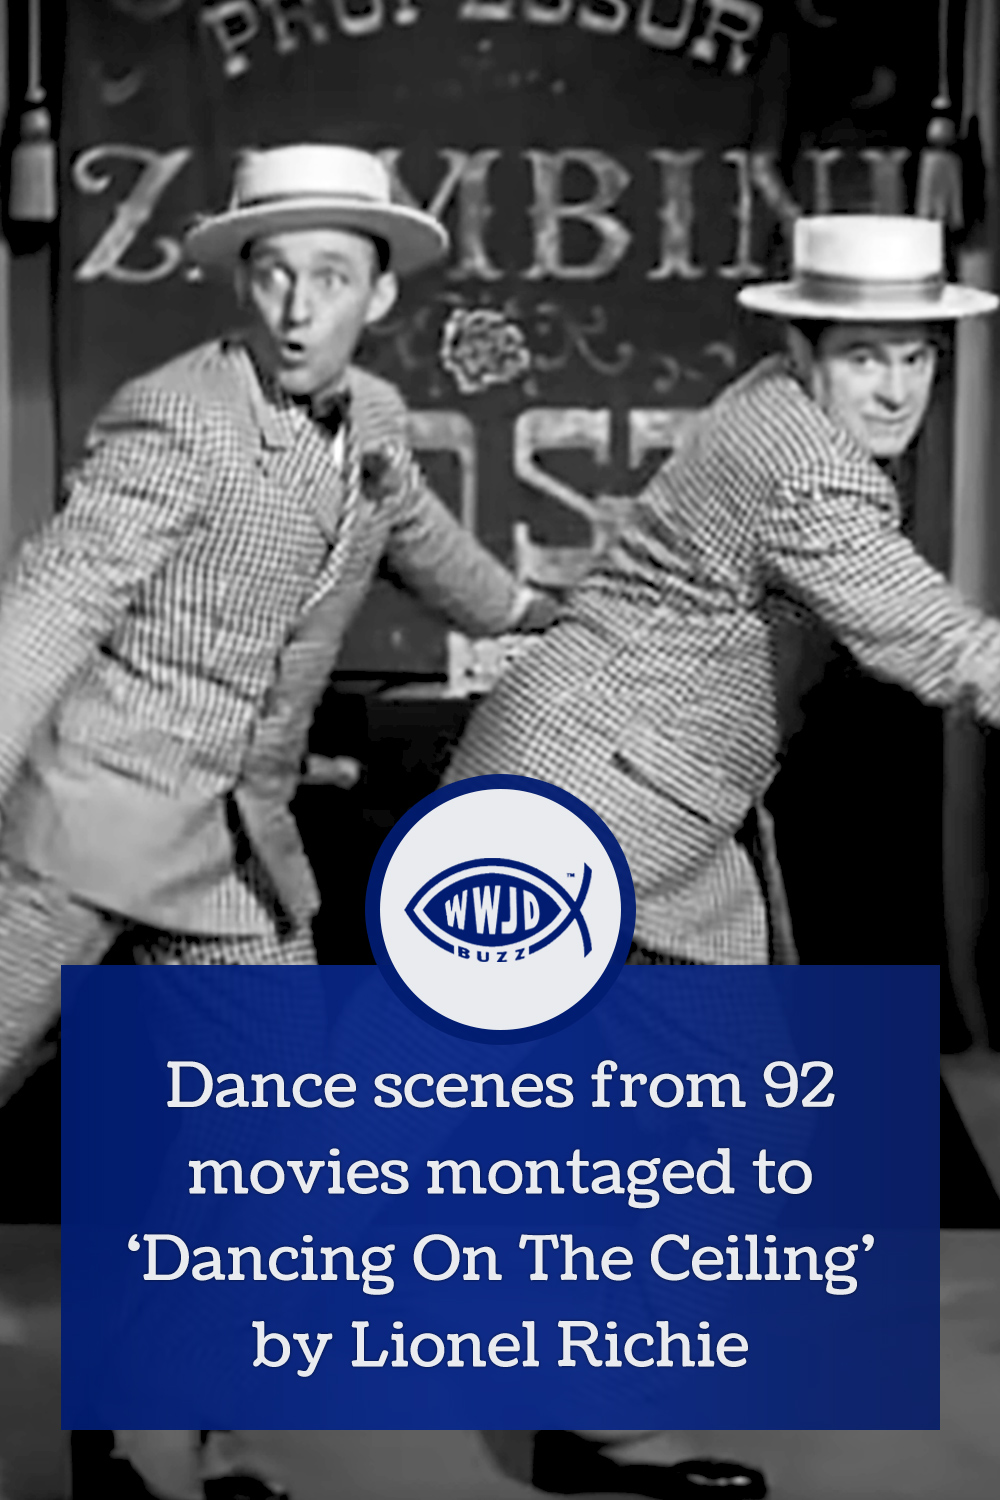 Dance scenes from 92 movies montaged to ‘Dancing On The Ceiling’ by Lionel Richie